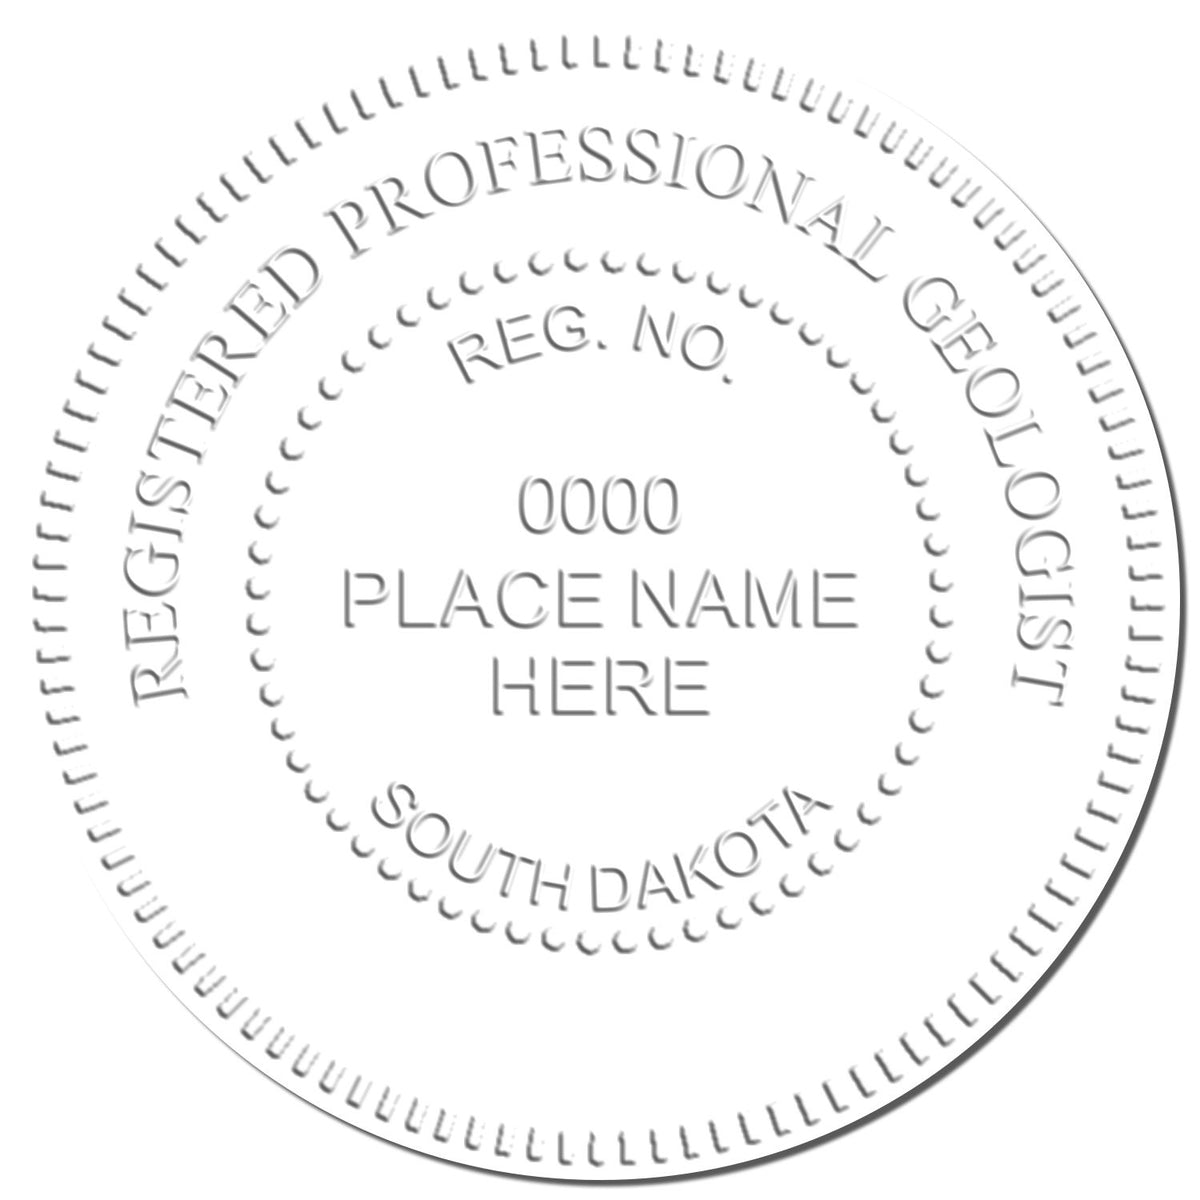 The South Dakota Geologist Desk Seal stamp impression comes to life with a crisp, detailed image stamped on paper - showcasing true professional quality.